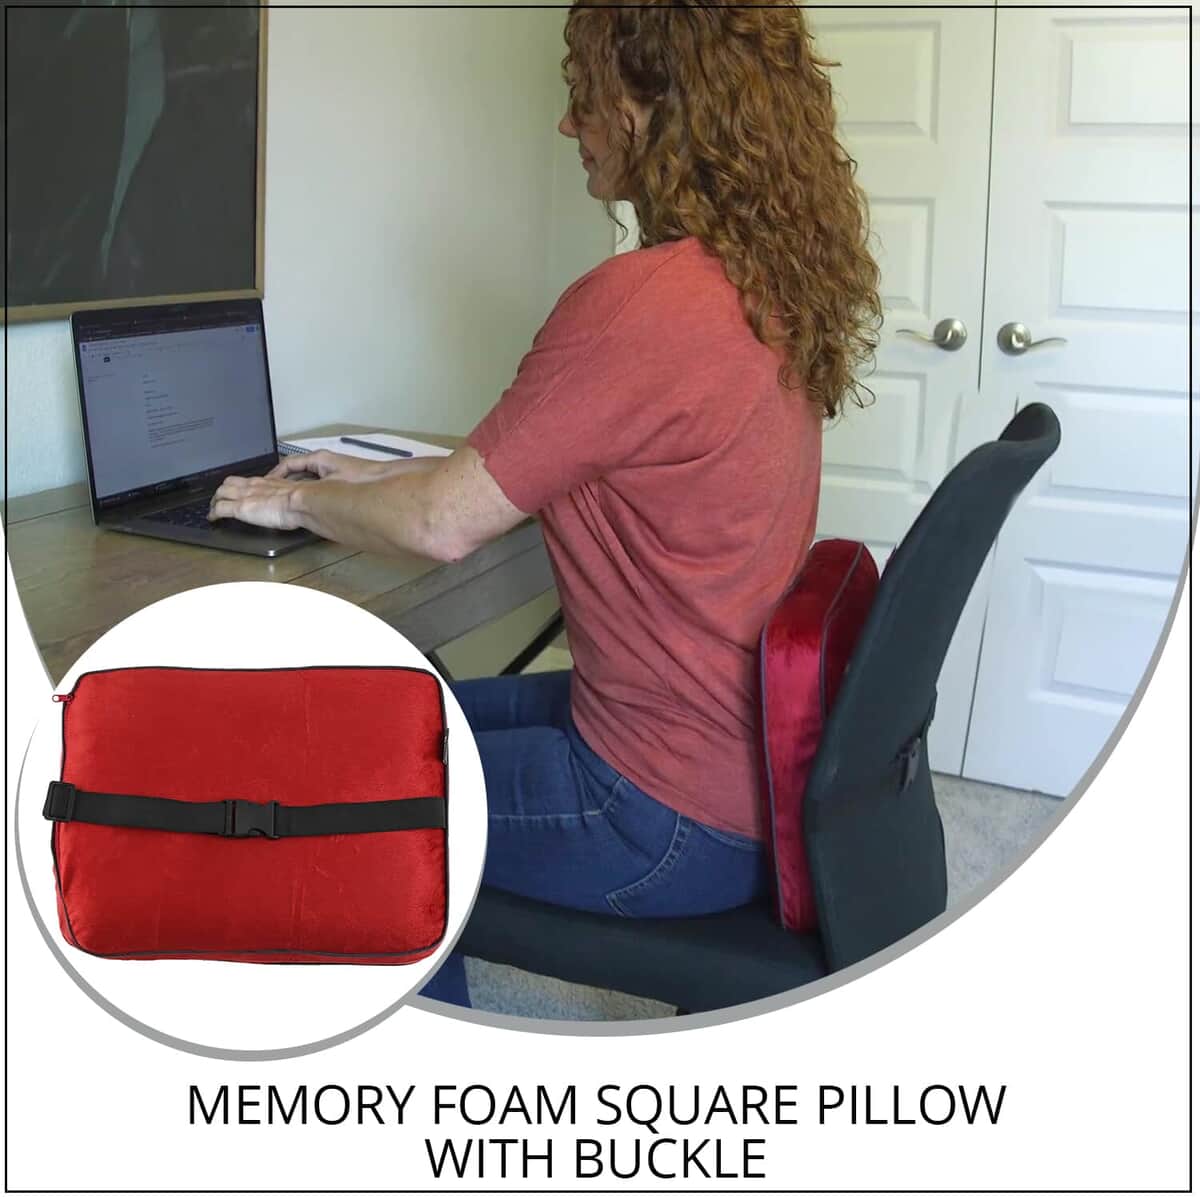 Bon Voyage Memory Foam Square Pillow with Buckle - Red, Square Cushion Insert for Chair Car Sofa Bed, Backrest Cushion, Lower Back Support And Pain Relief Seat Cushion image number 2